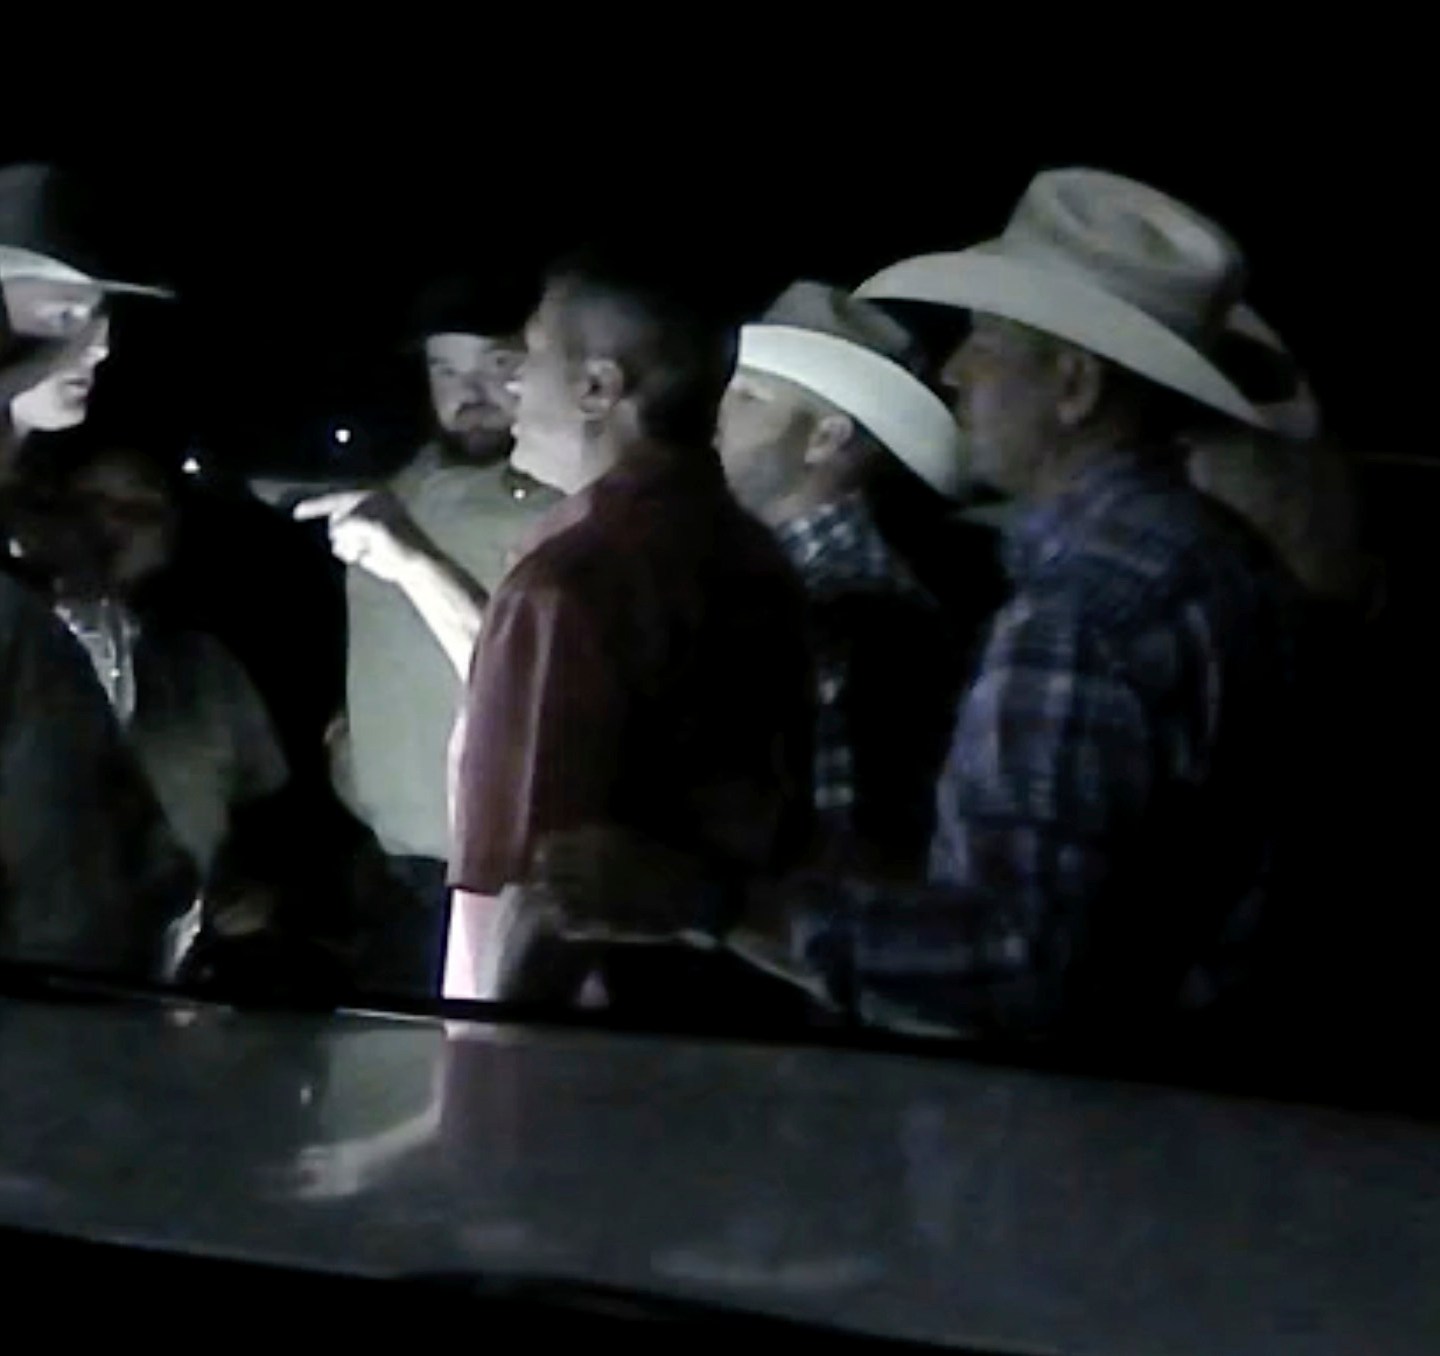 In this screen grab from body camera footage released by The Texas Department of Public Safety on Monday, Aug. 14, 2023, U.S. Rep. Ronny Jackson of Texas is seen arguing with officers outside a rodeo near Amarillo, Texas, in July. The video shows Jackson being taken to the ground by officers and profanely berating them. The congressman later said he was trying to help a person who needed medical care before officers intervened. (The Texas Department of Public Safety via AP)